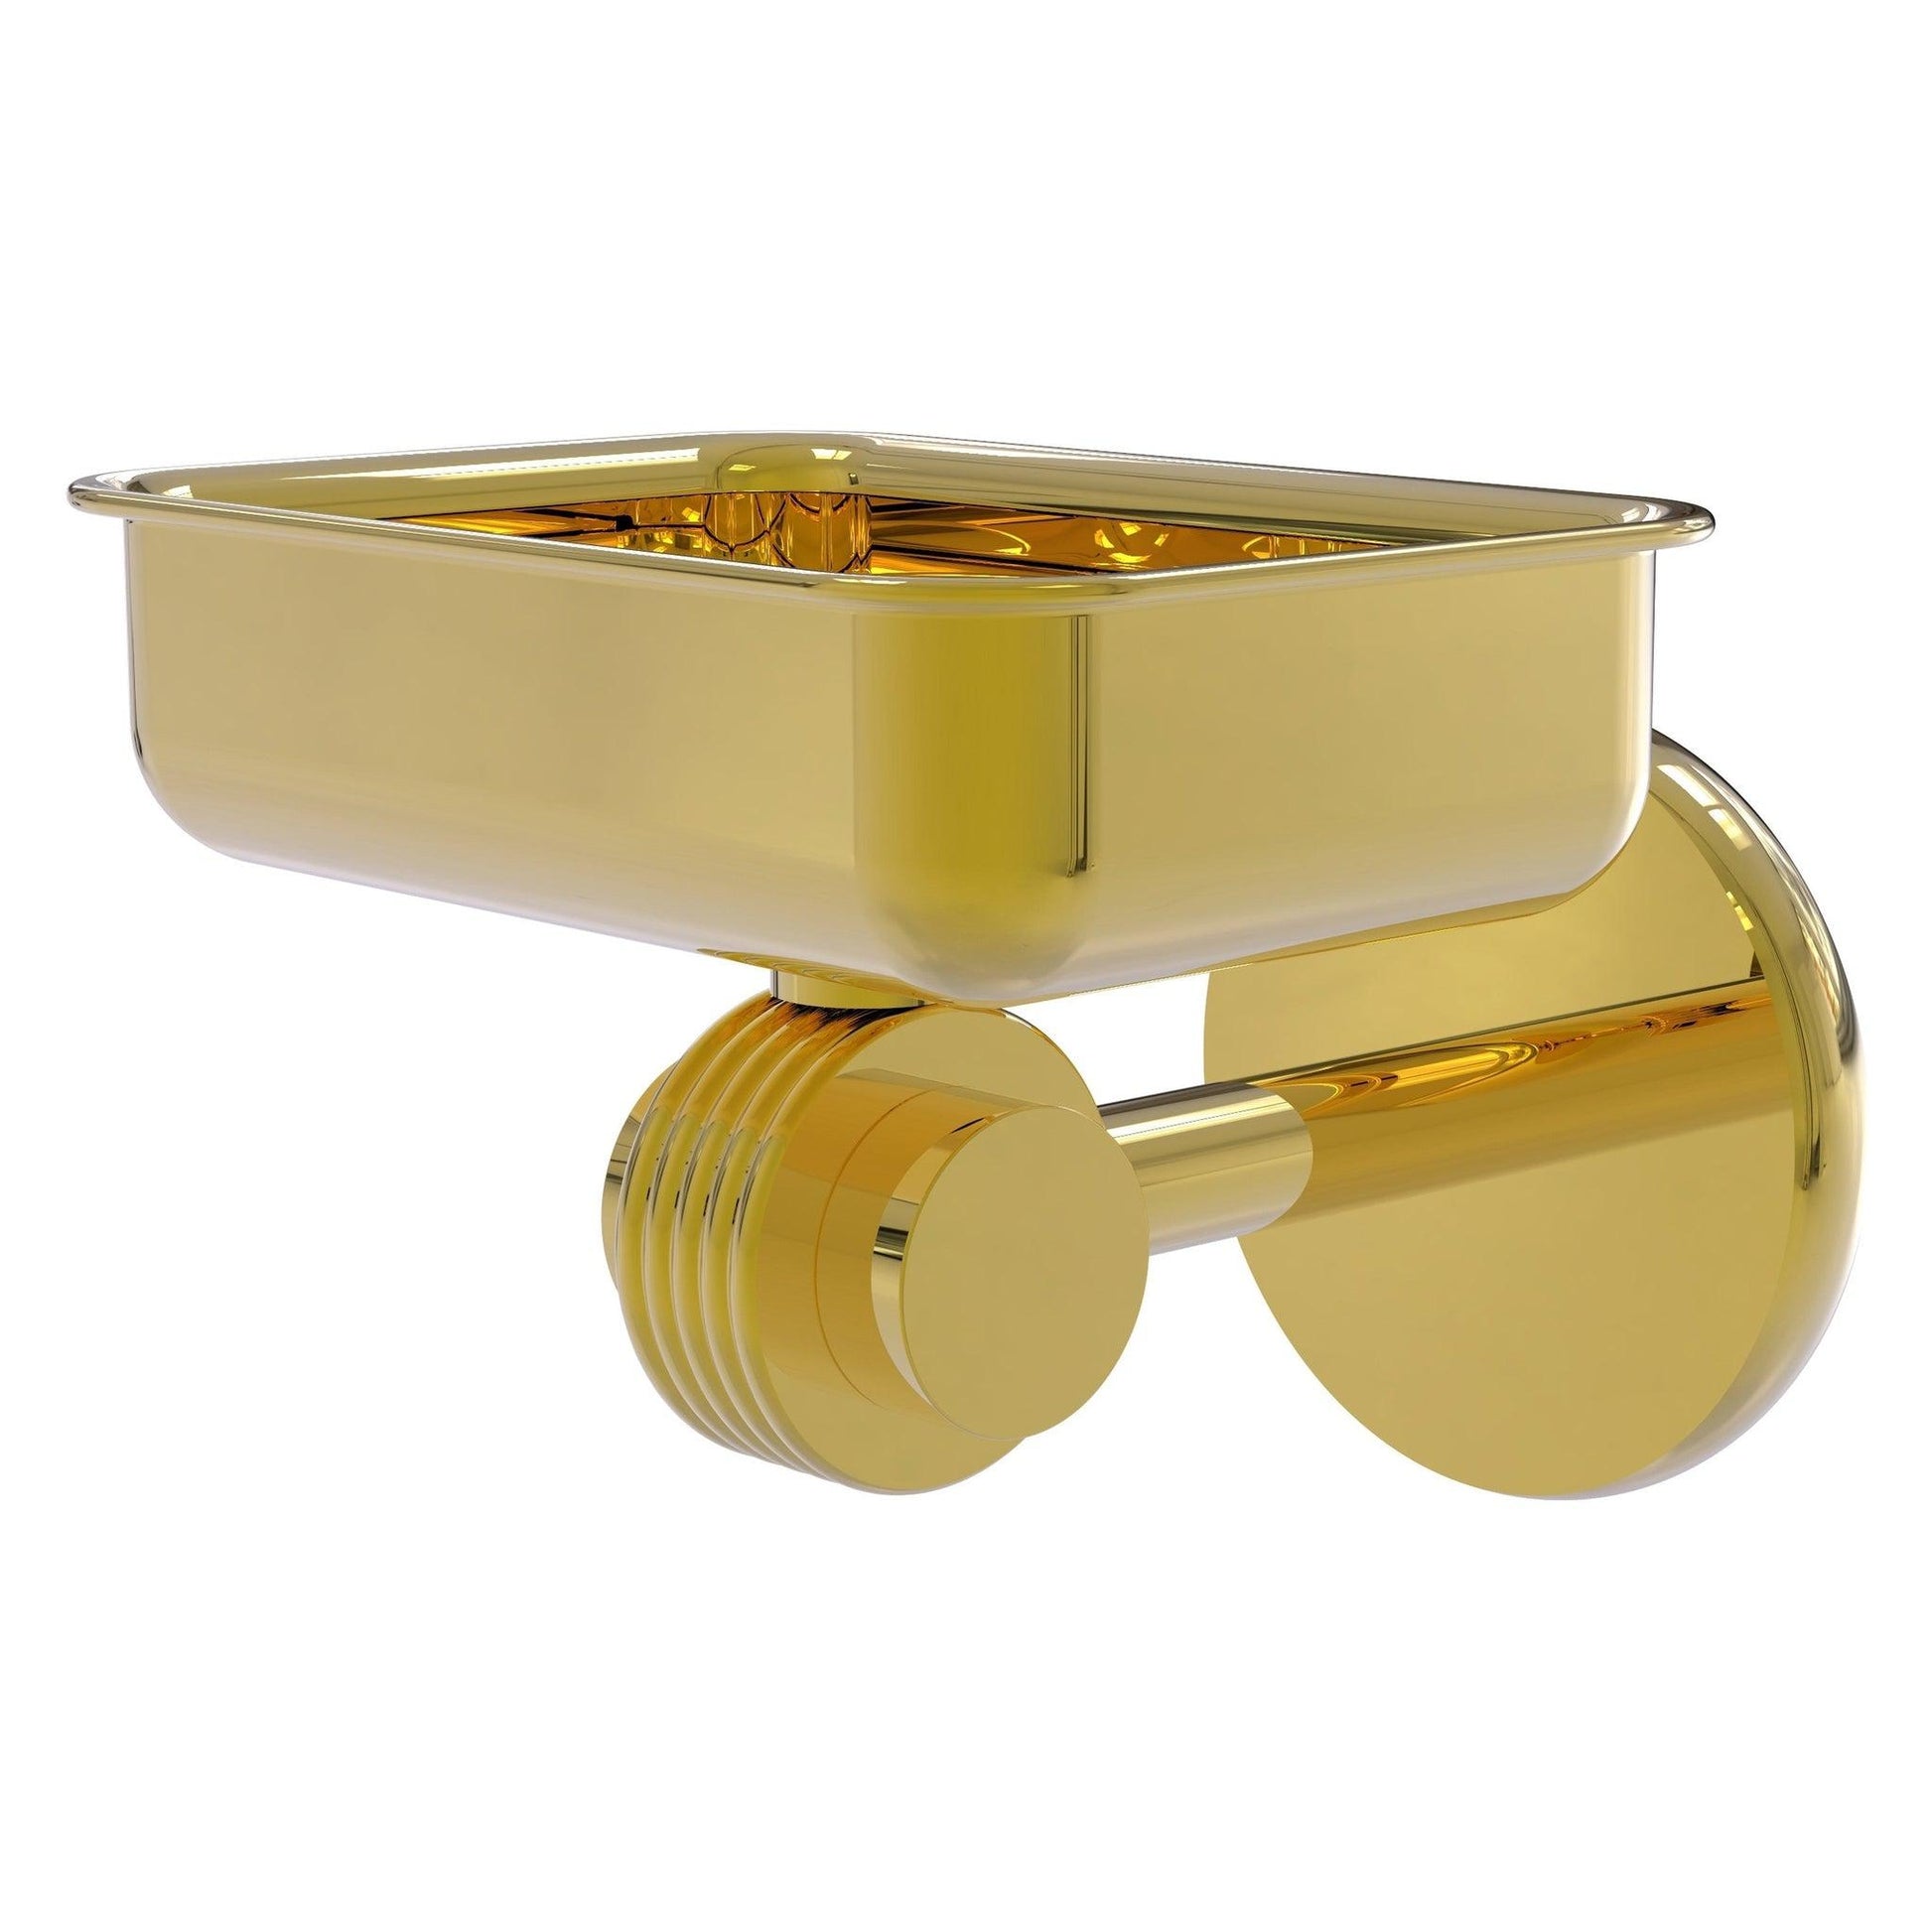 https://usbathstore.com/cdn/shop/files/Allied-Brass-Satellite-Orbit-Two-4_5-x-3_5-Polished-Brass-Solid-Brass-Wall-Mounted-Soap-Dish-With-Grooved-Accents.jpg?v=1684964956&width=1946